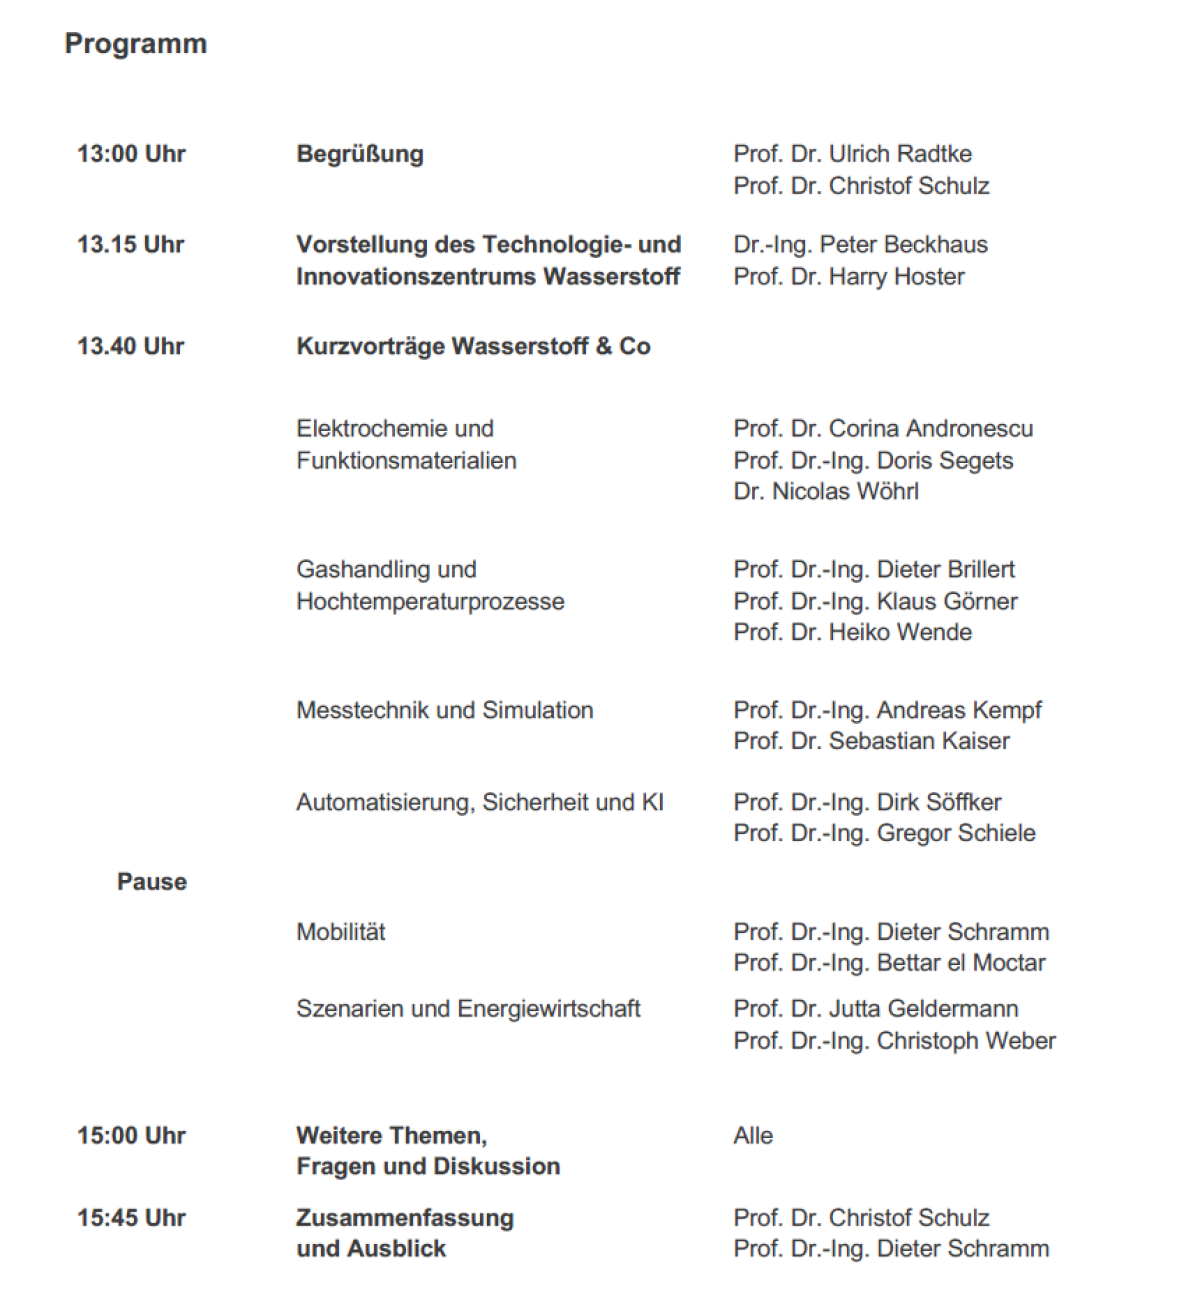 The program of the event on the Hydrogen Technology and Innovation Center